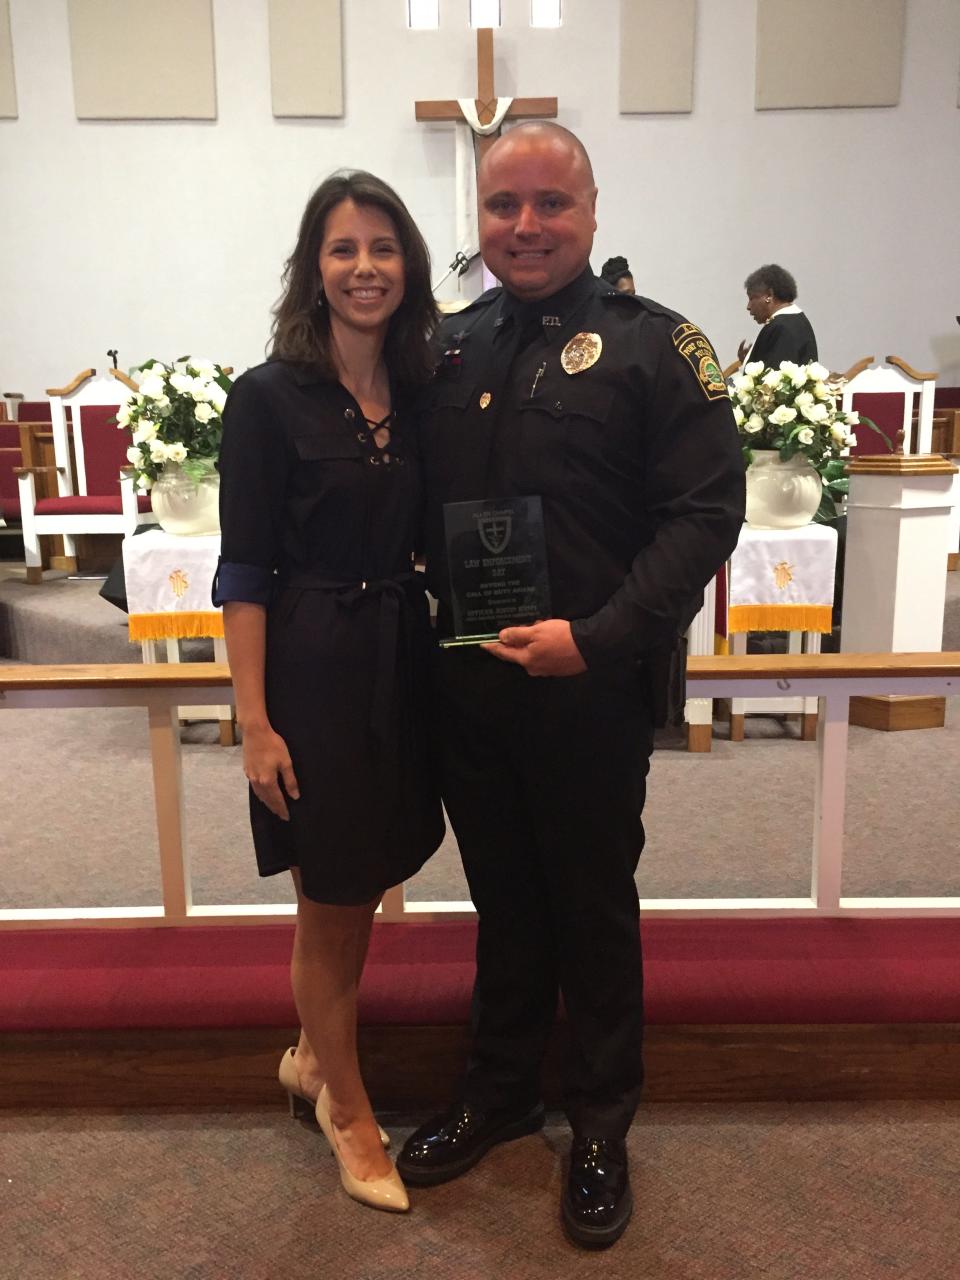 Carlyn and Justin White celebrate Law Enforcement Day in 2015 at Allen Chapel AME Church in Daytona Beach. A 15-year veteran of the Port Orange Police Department, Justin White died on Aug. 5, 2021, from complications of COVID-19. He was 39.